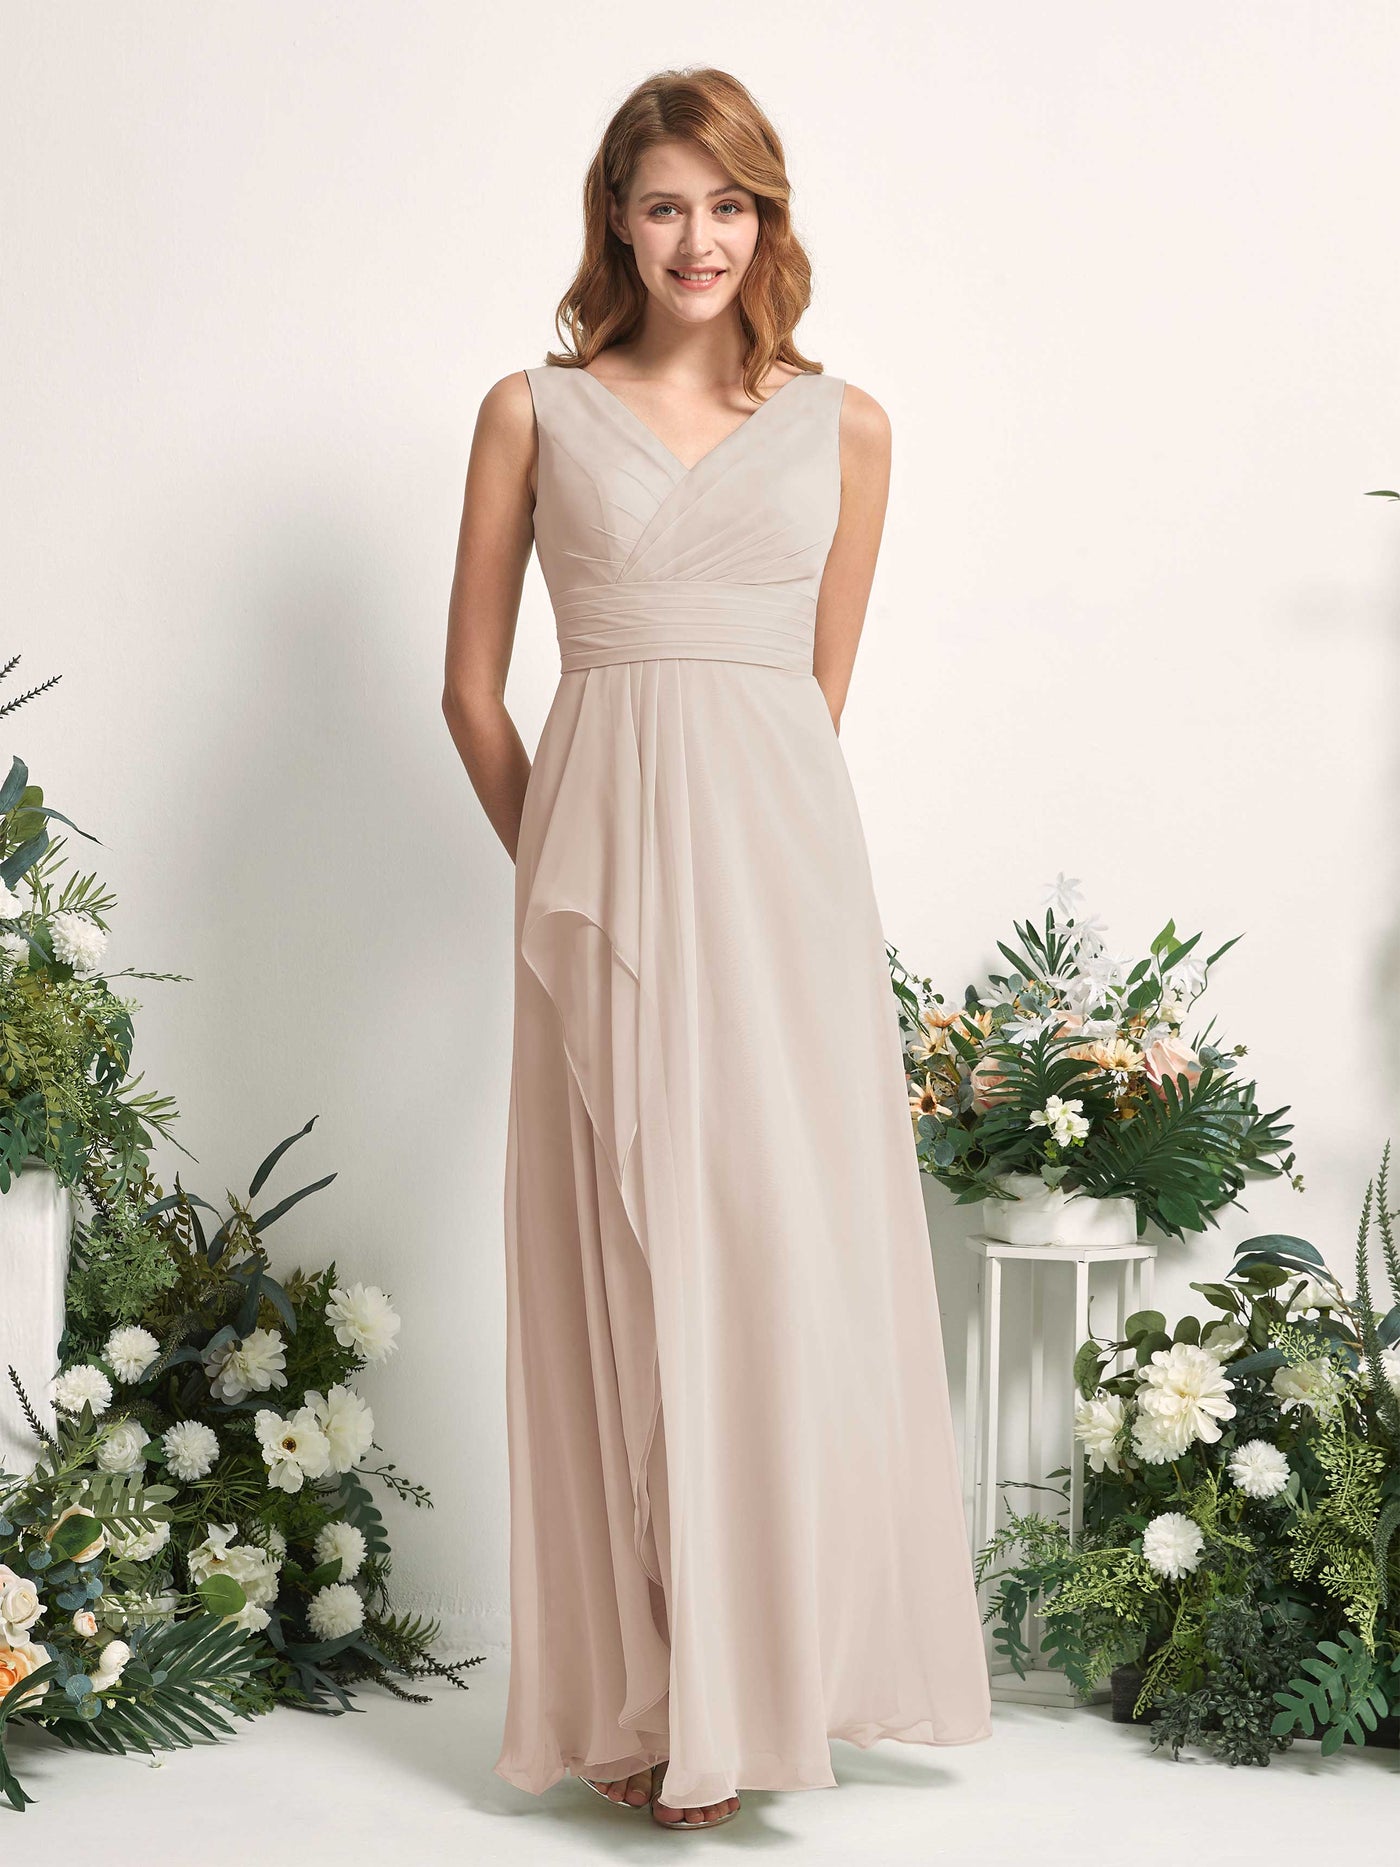 Bridesmaid Dress A-line Chiffon V-neck Full Length Sleeveless Wedding Party Dress - Champagne (81227116)#color_champagne